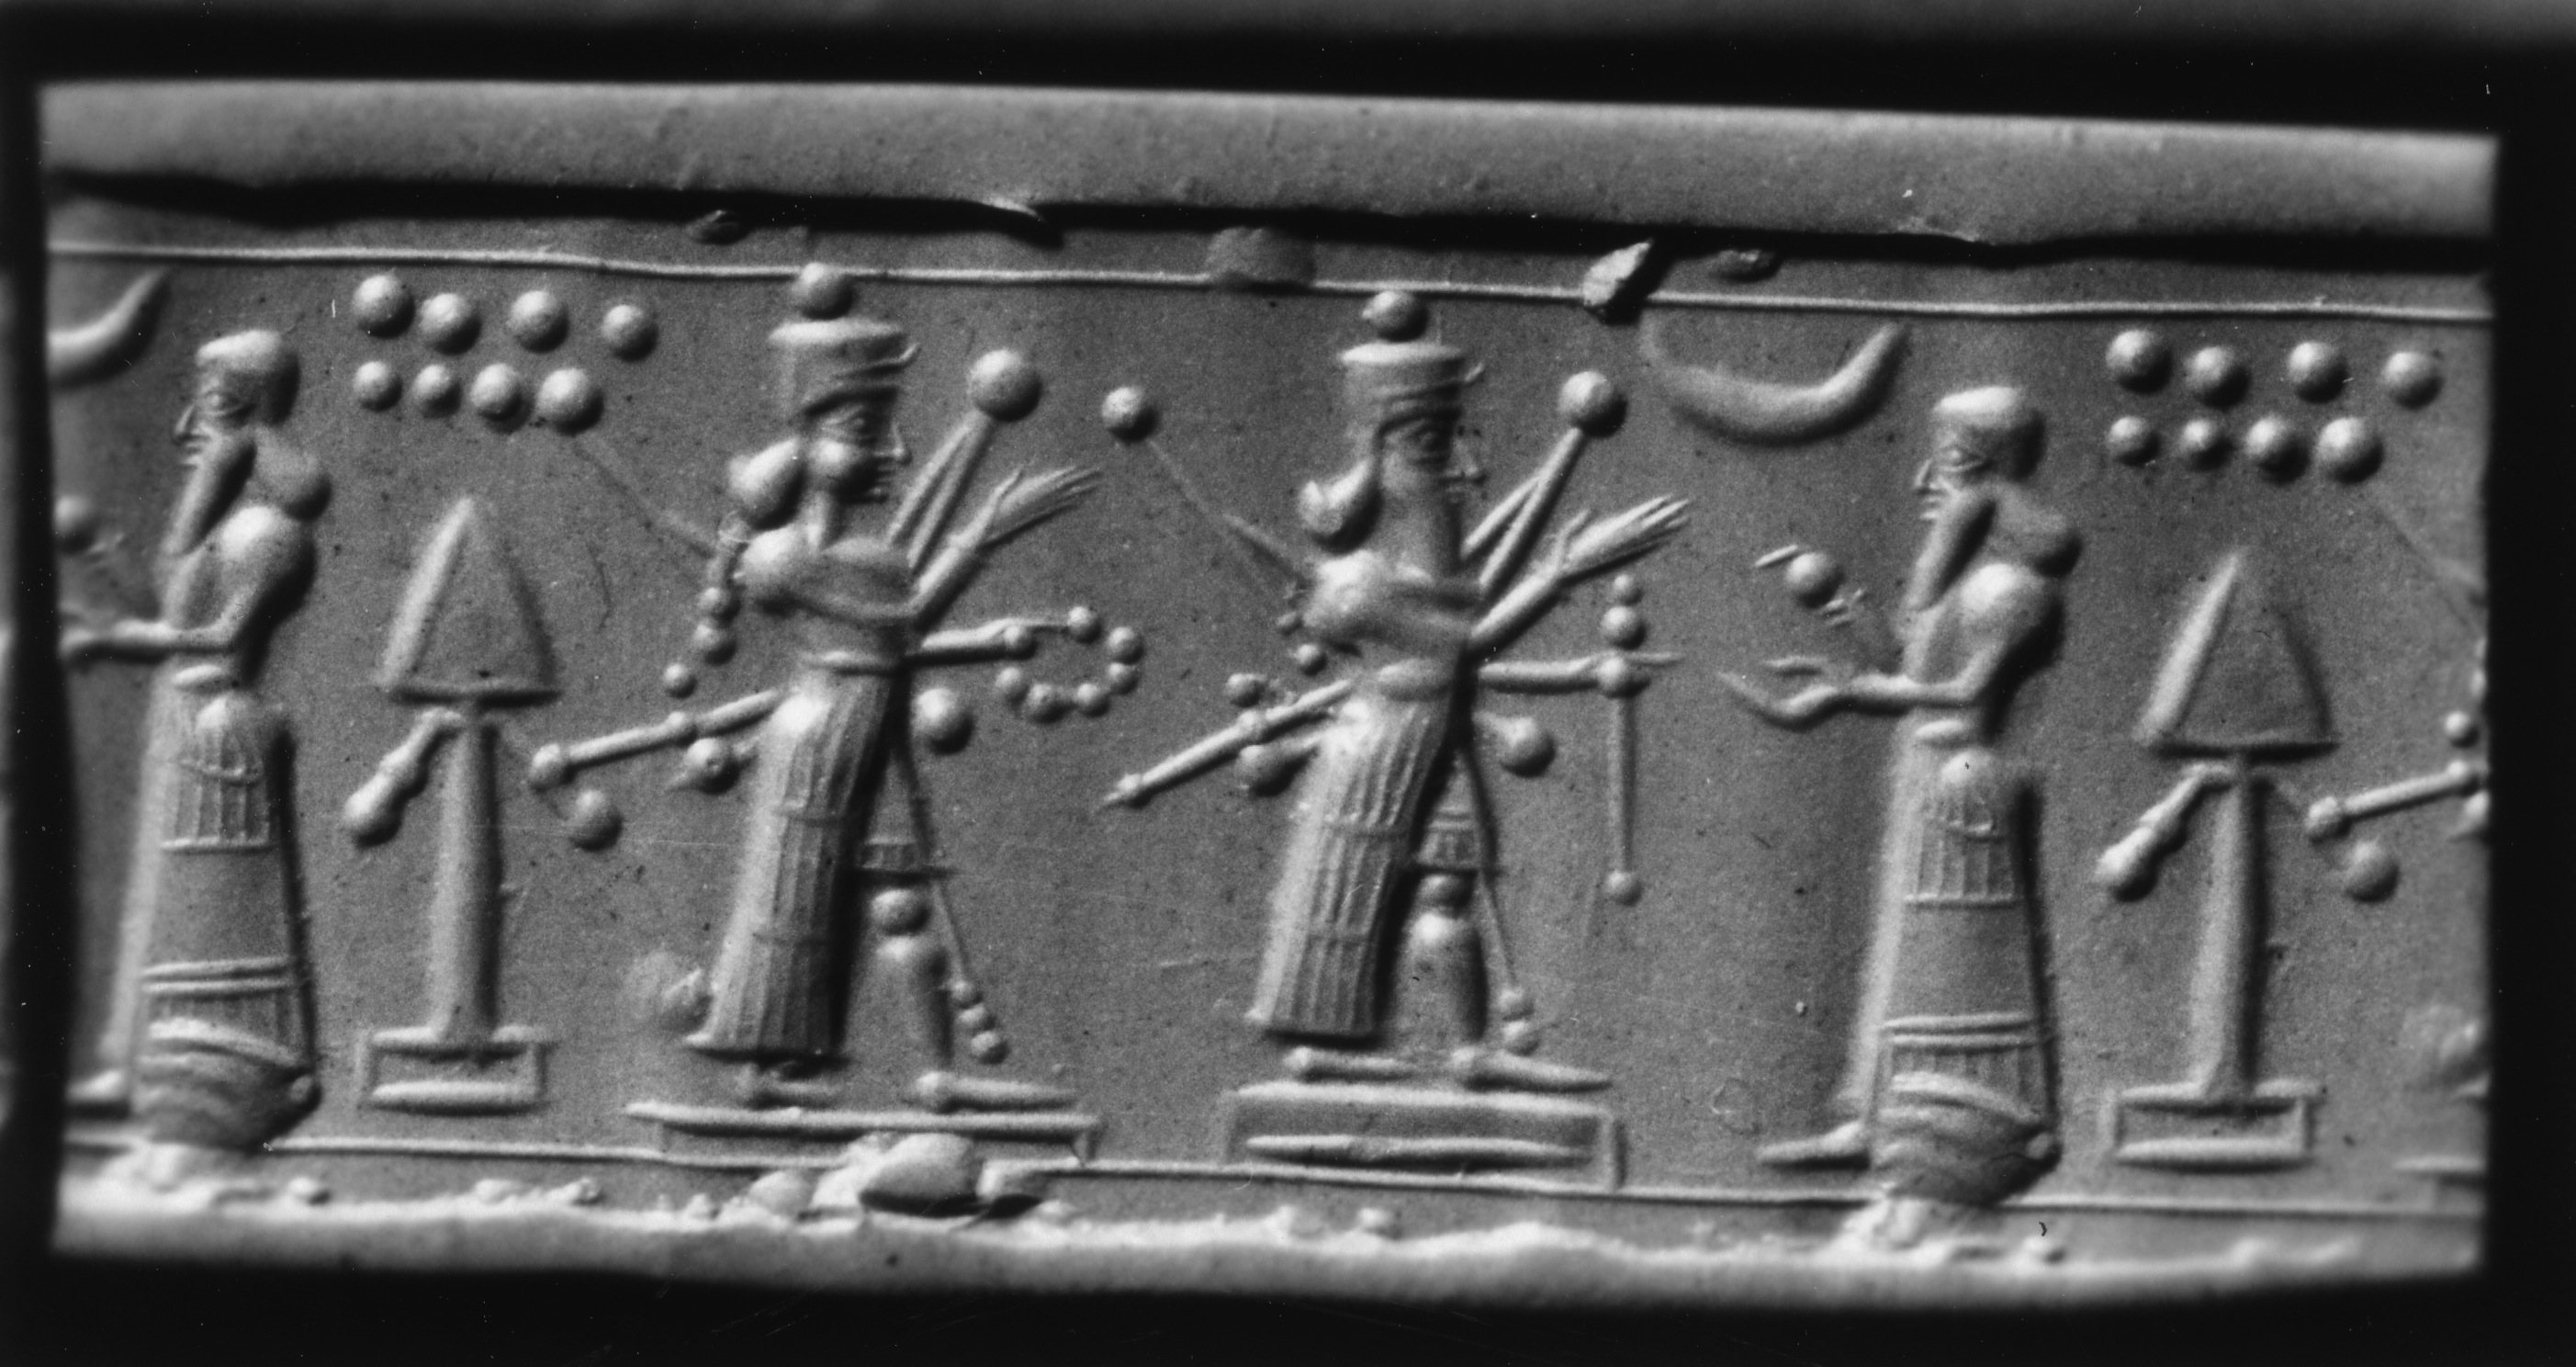 Image for Cylinder Seal with a Presentation Scene